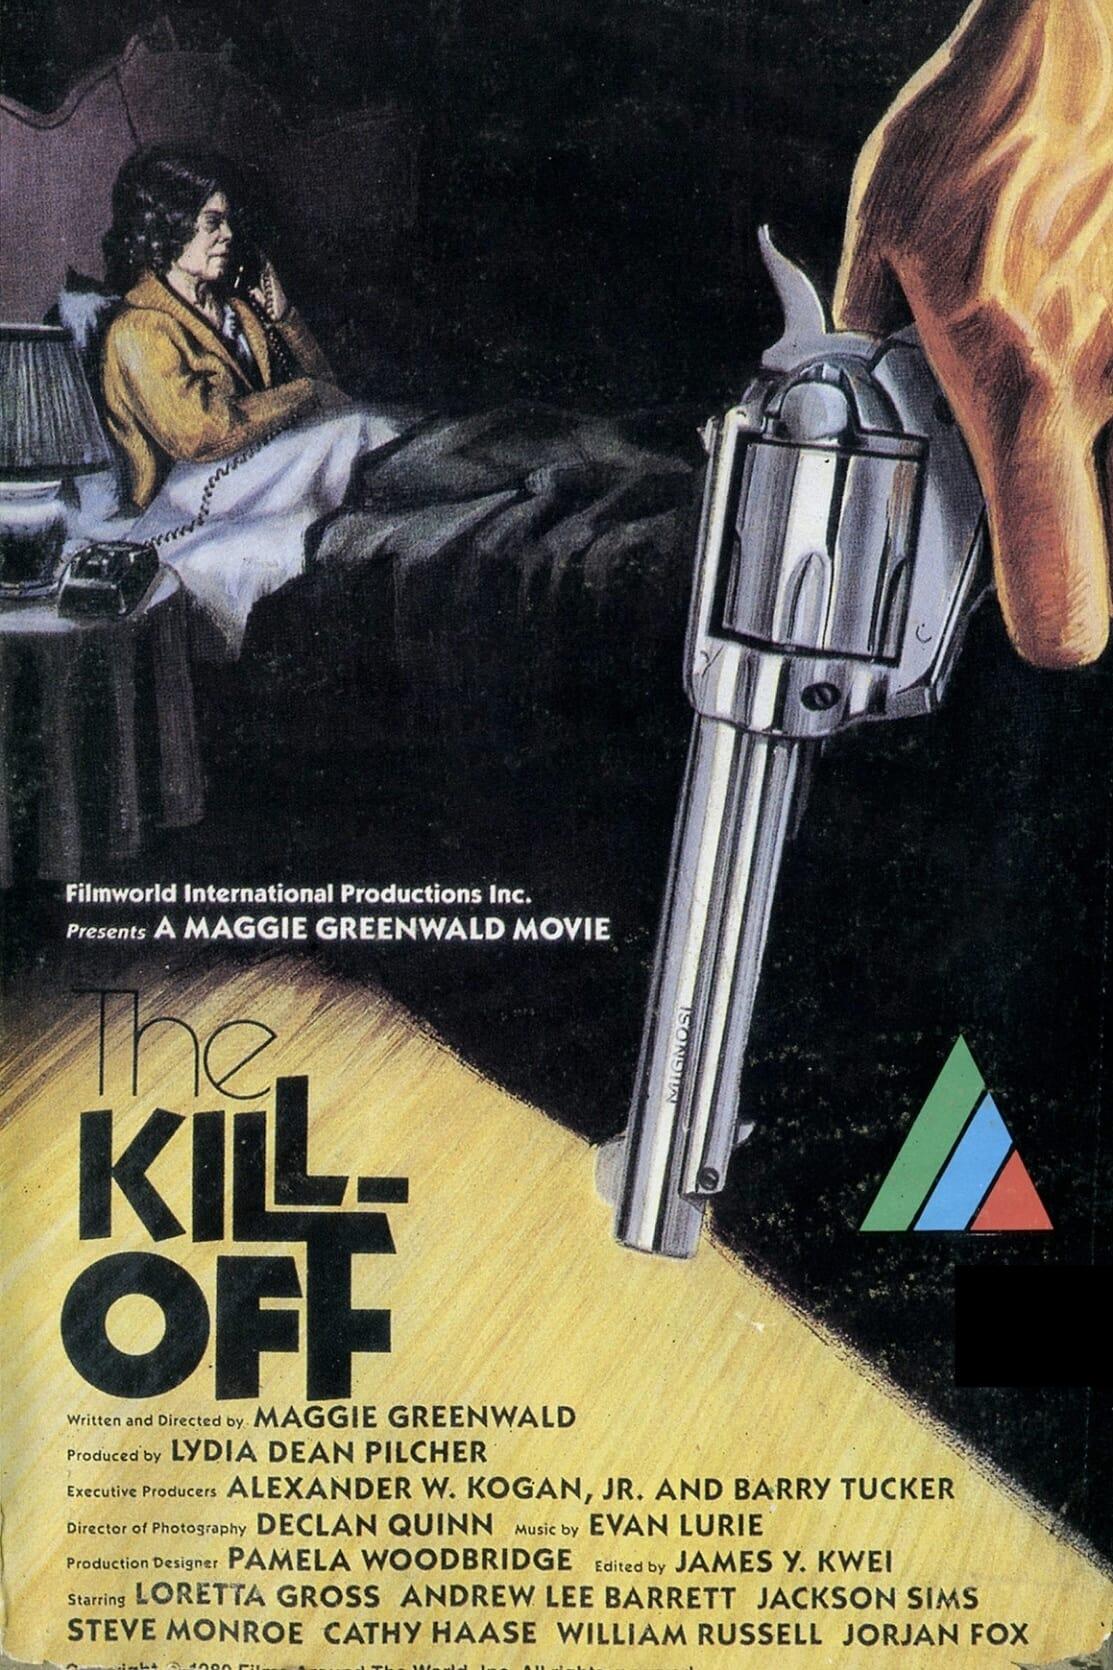 The Kill-Off poster